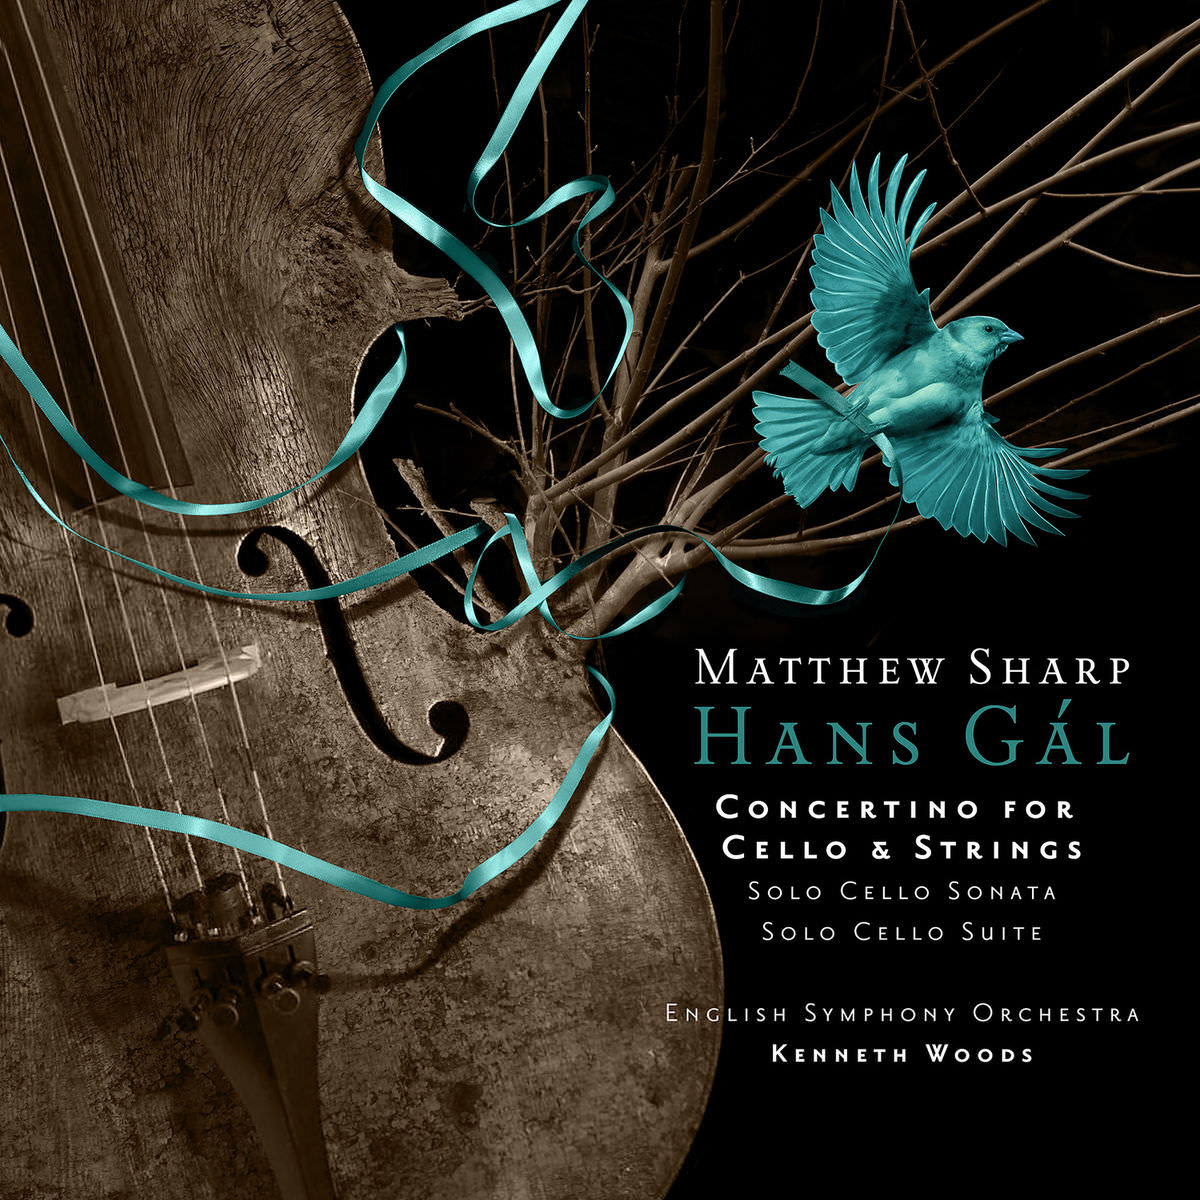 Matthew Sharp, English Symphony Orchestra & Kenneth Woods - Hans Gal: Concertino for Cello and Strings (2018) [FLAC 24bit/88,2kHz]